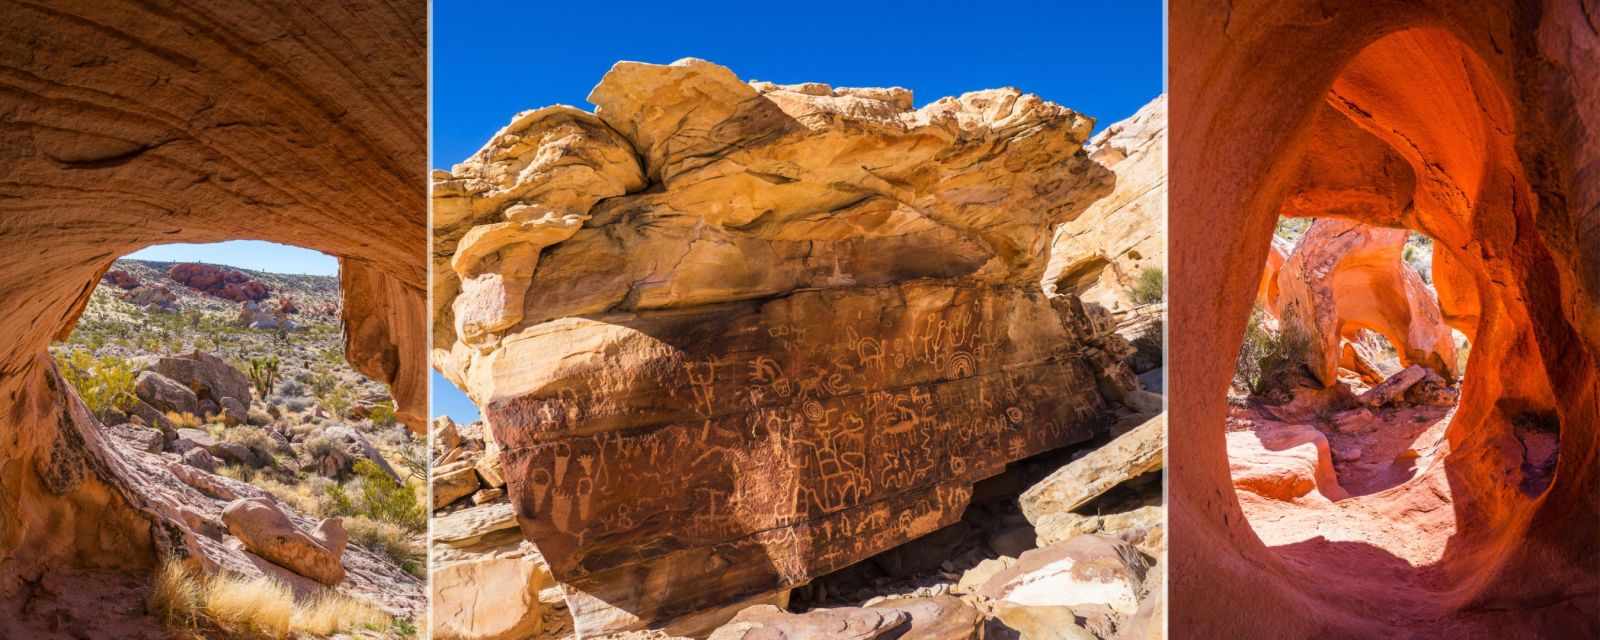 Gold Butte National Monument Guide - Petroglyphs and Little Finland